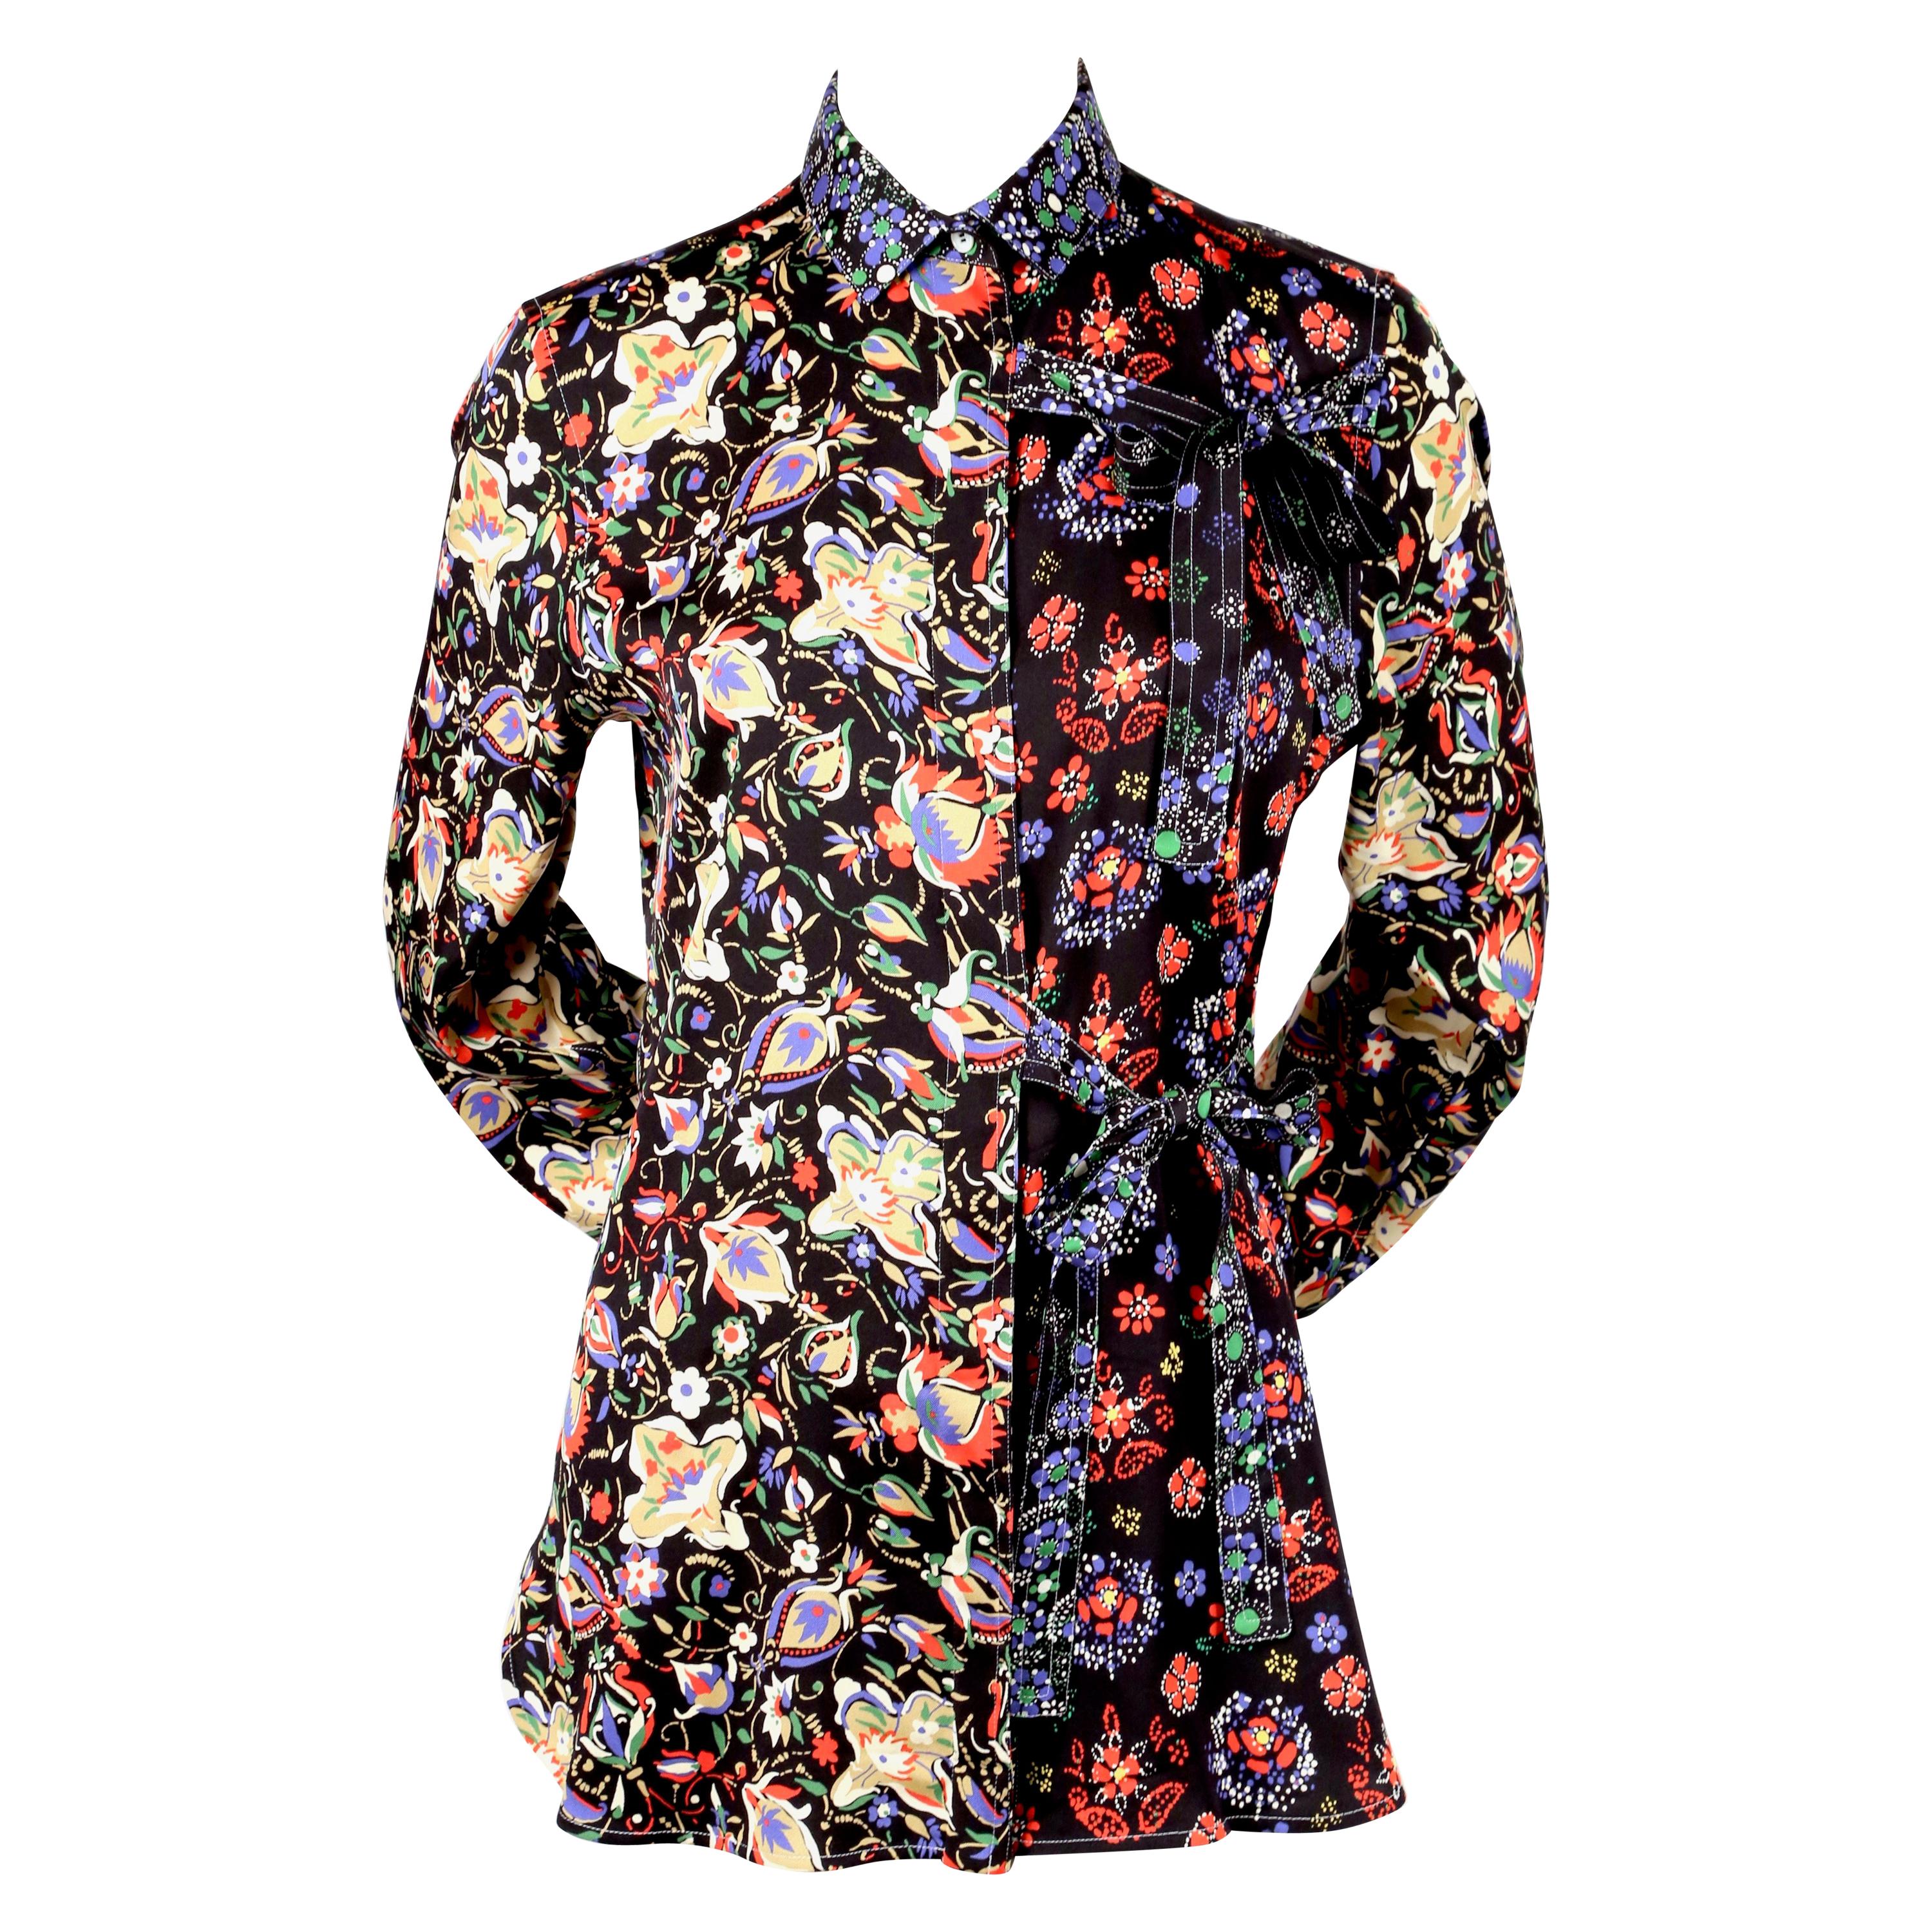 CELINE by PHOEBE PHILO floral printed silk shirt with ties